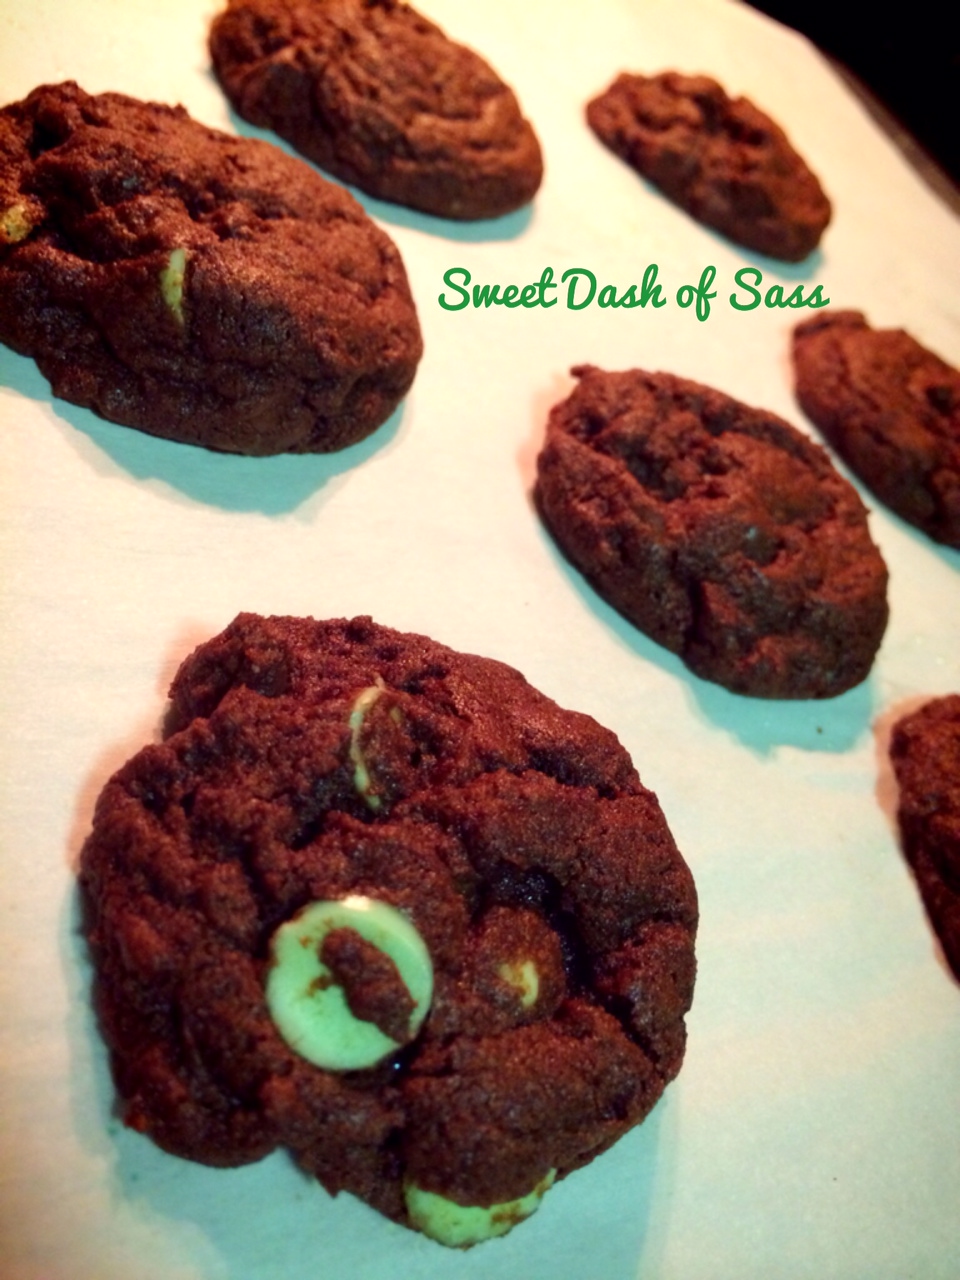 Chocolate Mint Cookies - 25 Days of Christmas - Cookie Style - www.SweetDashofSass.com